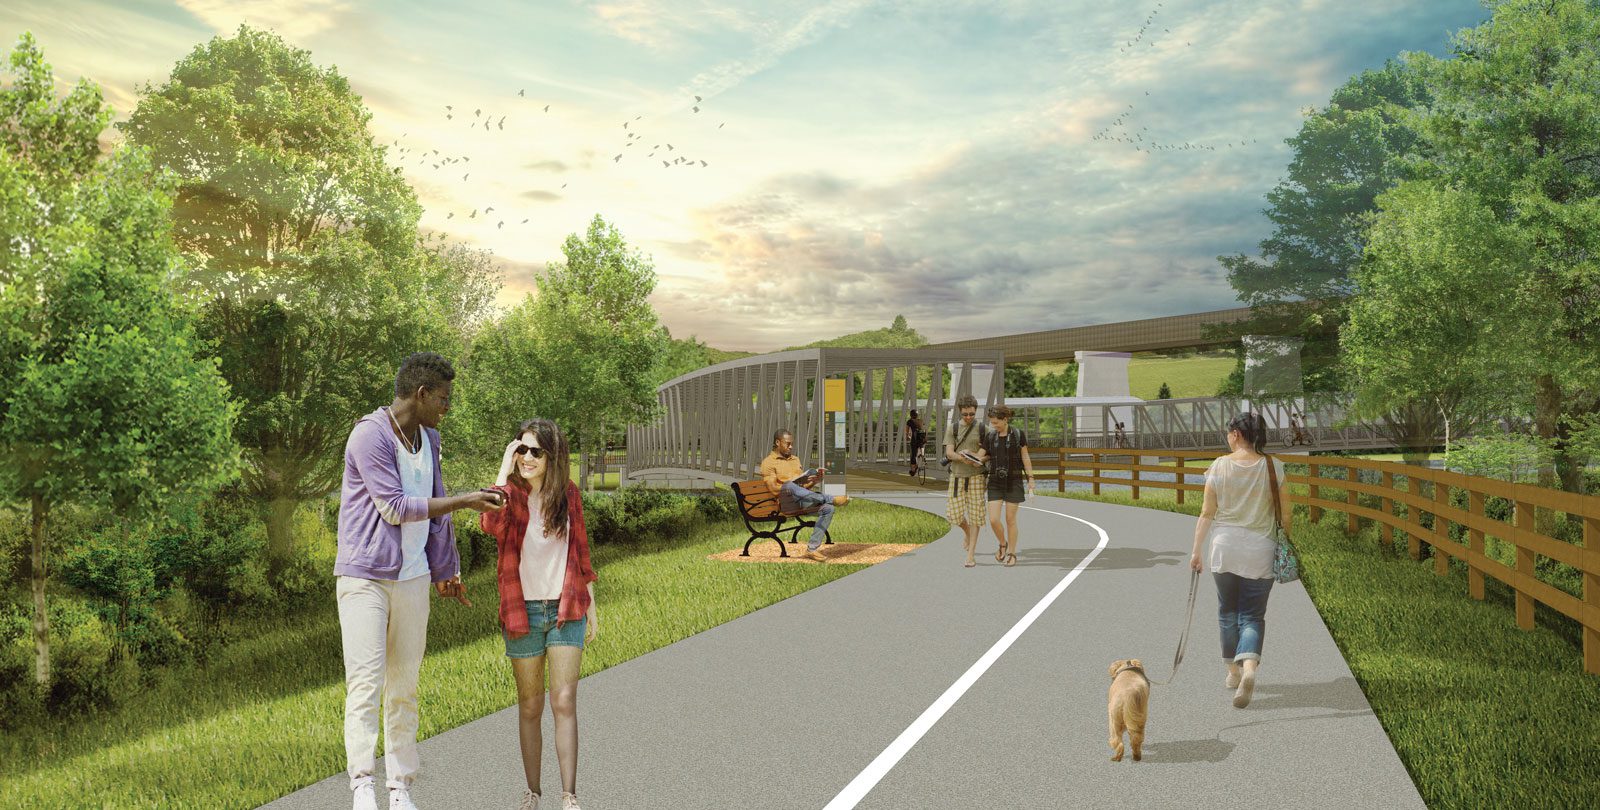 Mid Humber Gap Perspective Rendering of Main Trail